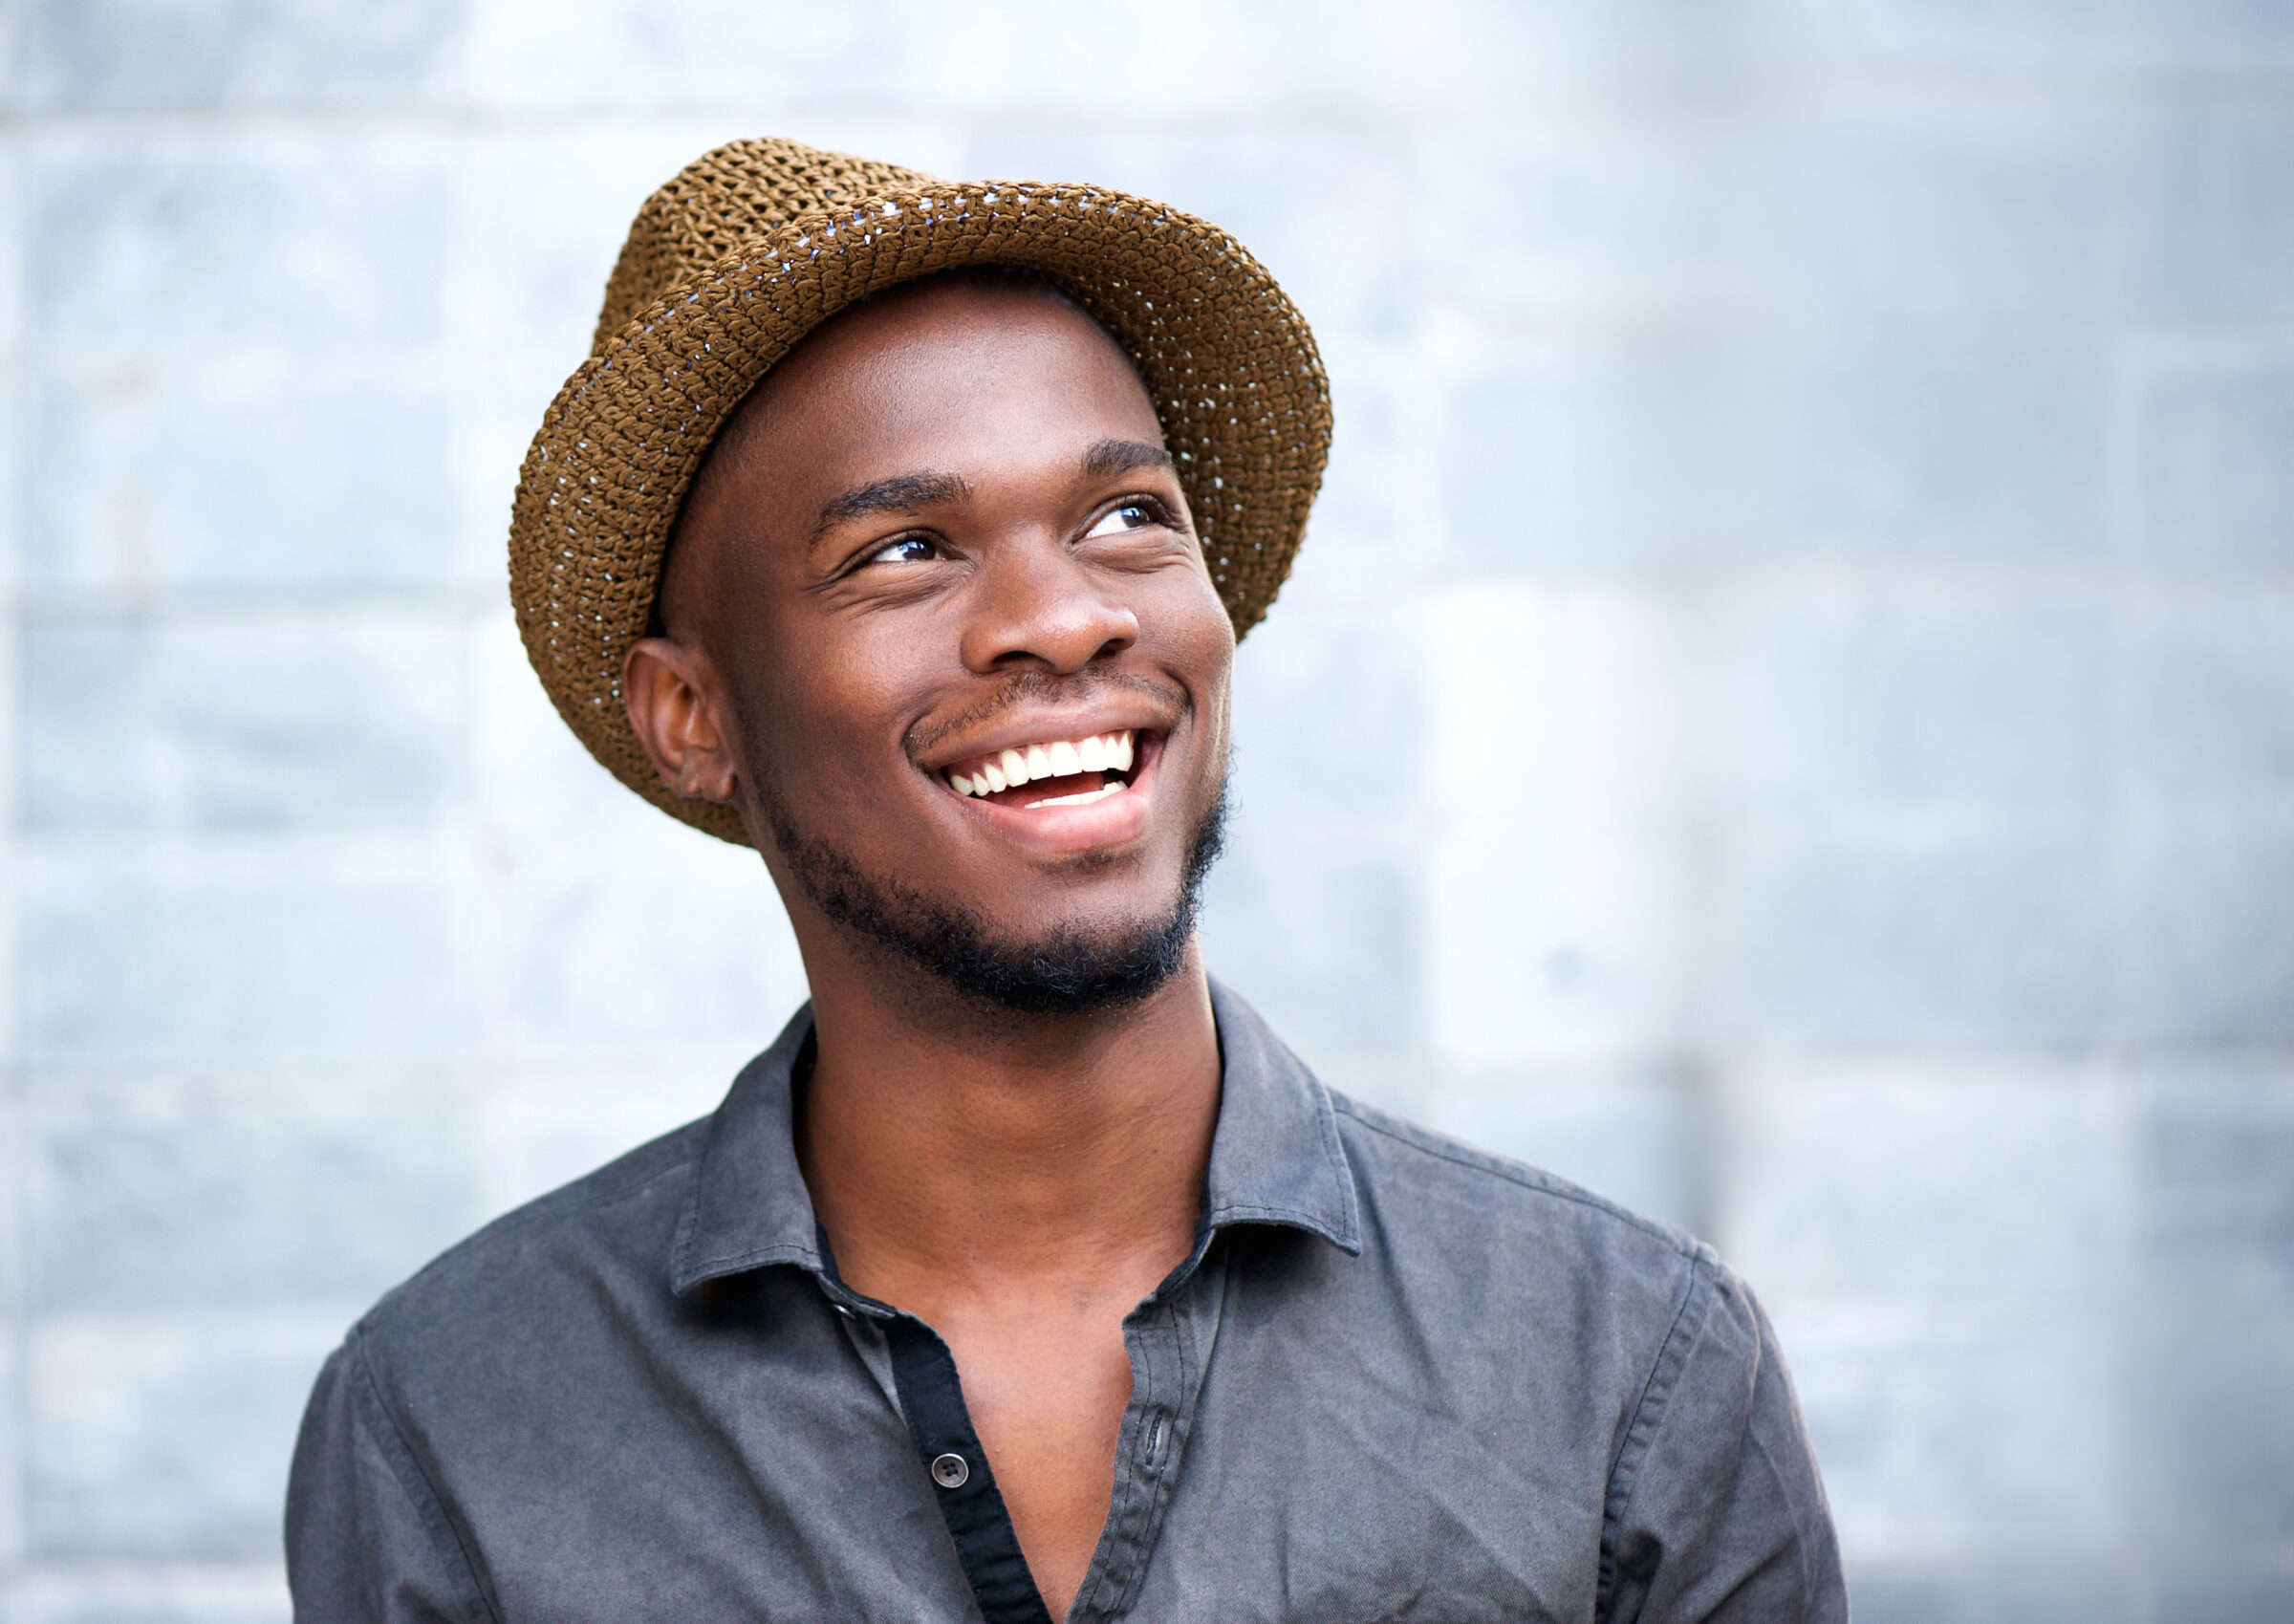 A handsome African American man smiling